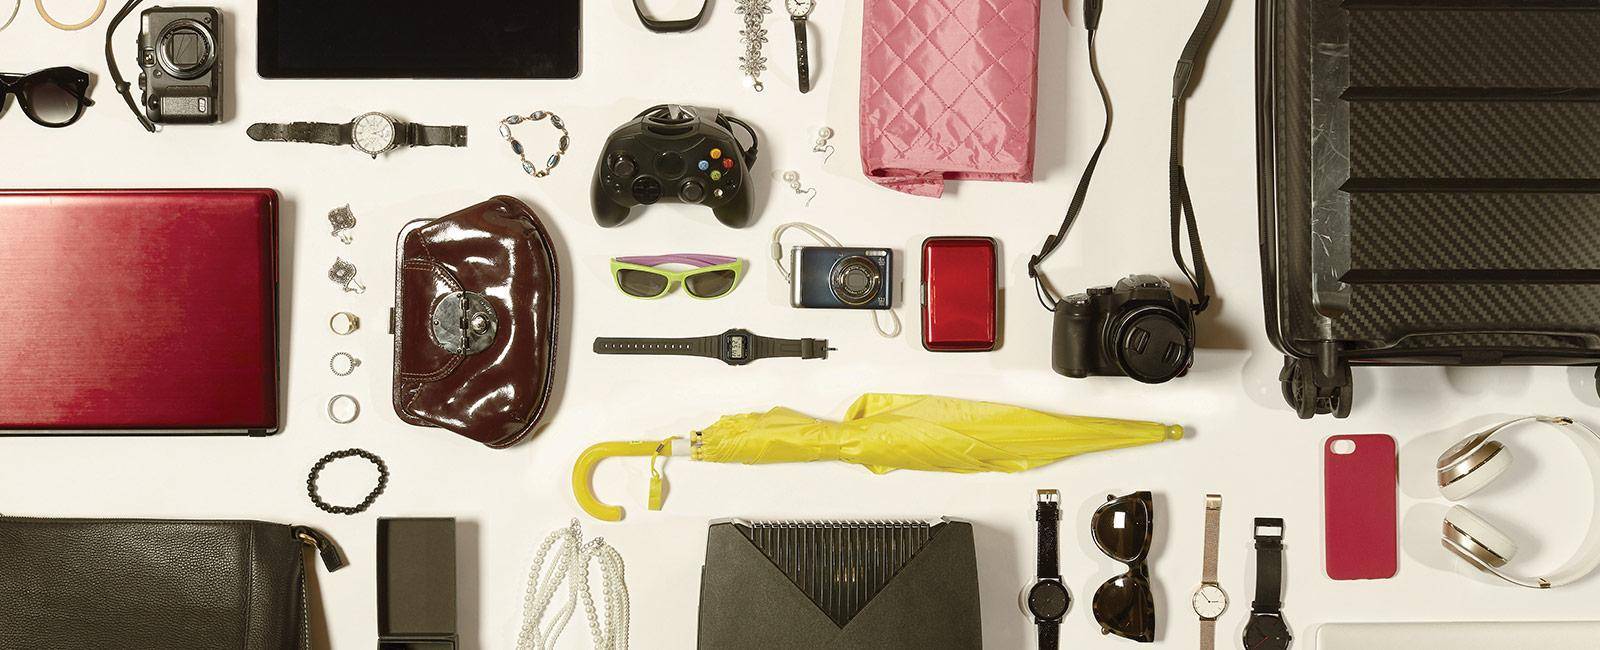 Brisbane Airport Lost Property Charity Auction